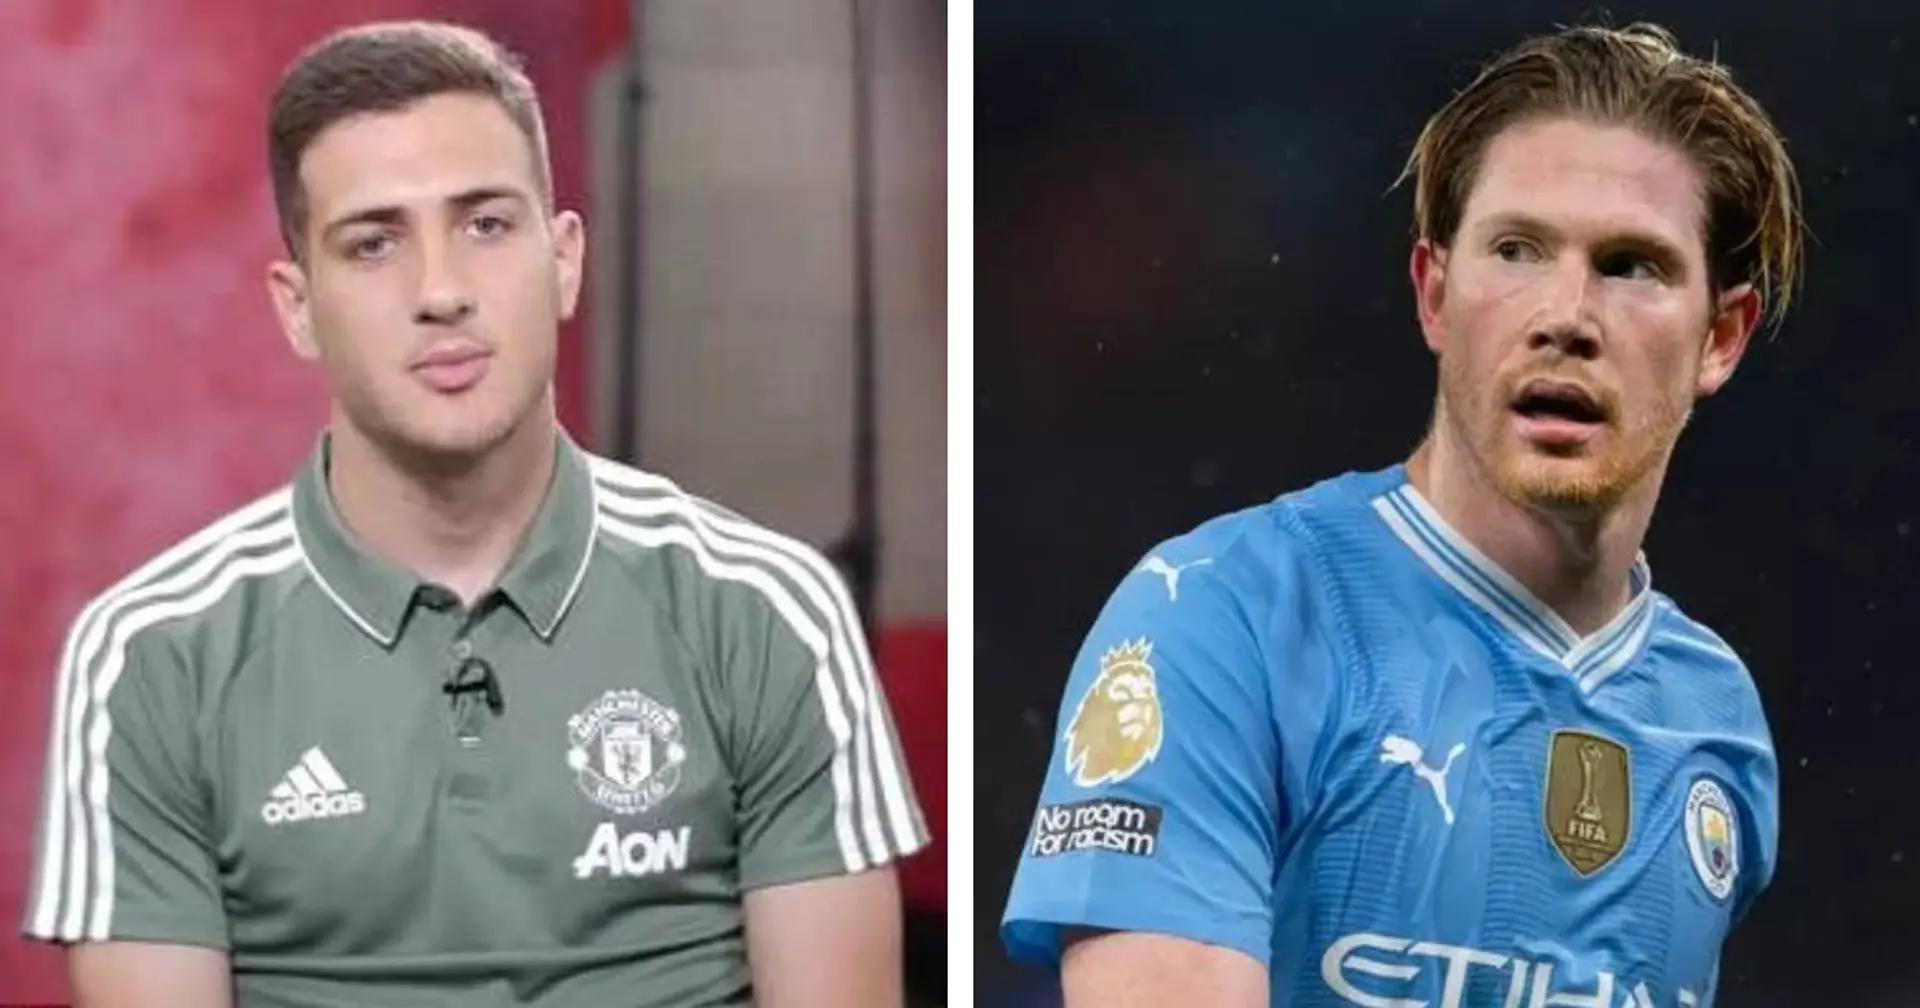 Diogo Dalot suggests Kevin De Bruyne has highest IQ among footballers